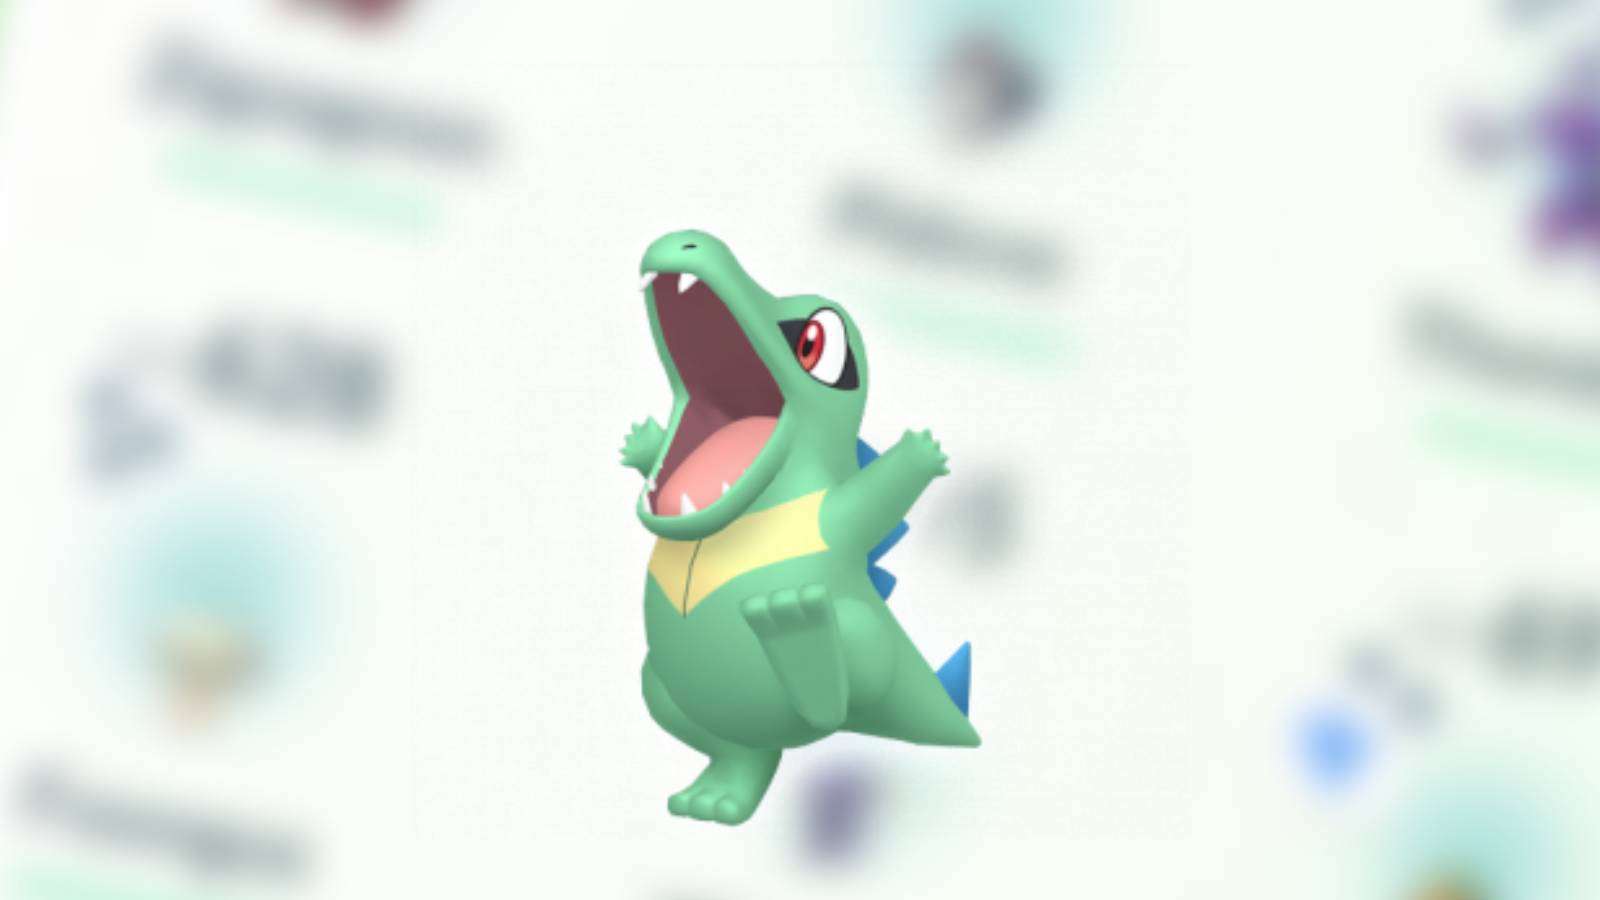 A Shiny Totodile sits in the center of the image, while a blurred image of several Shiny Pokemon is placed in the background